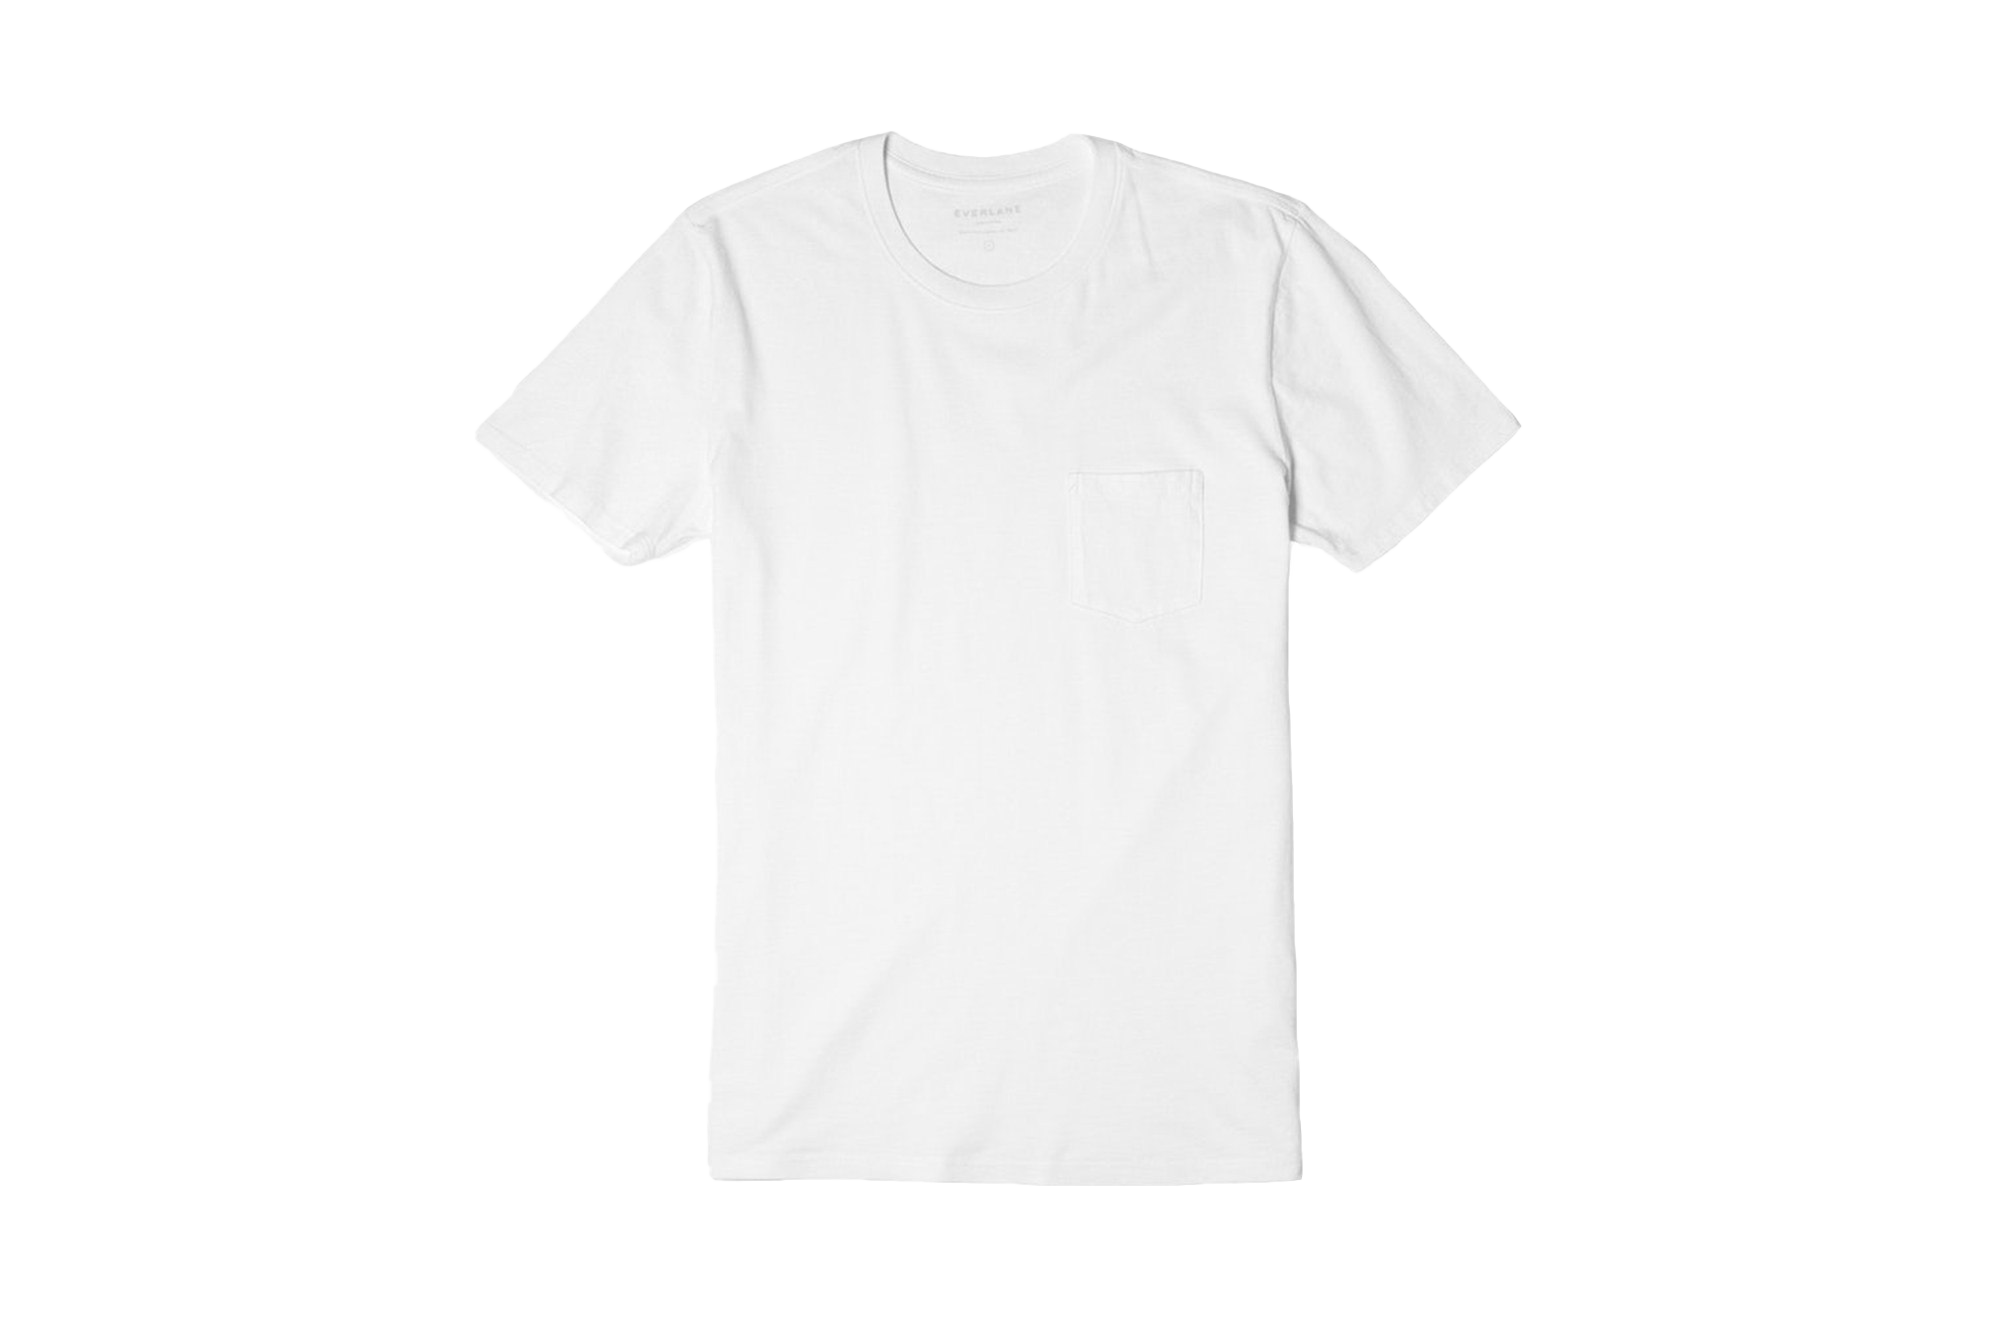 Download Images Of Plain White T Shirts - Shirt Photo Collection